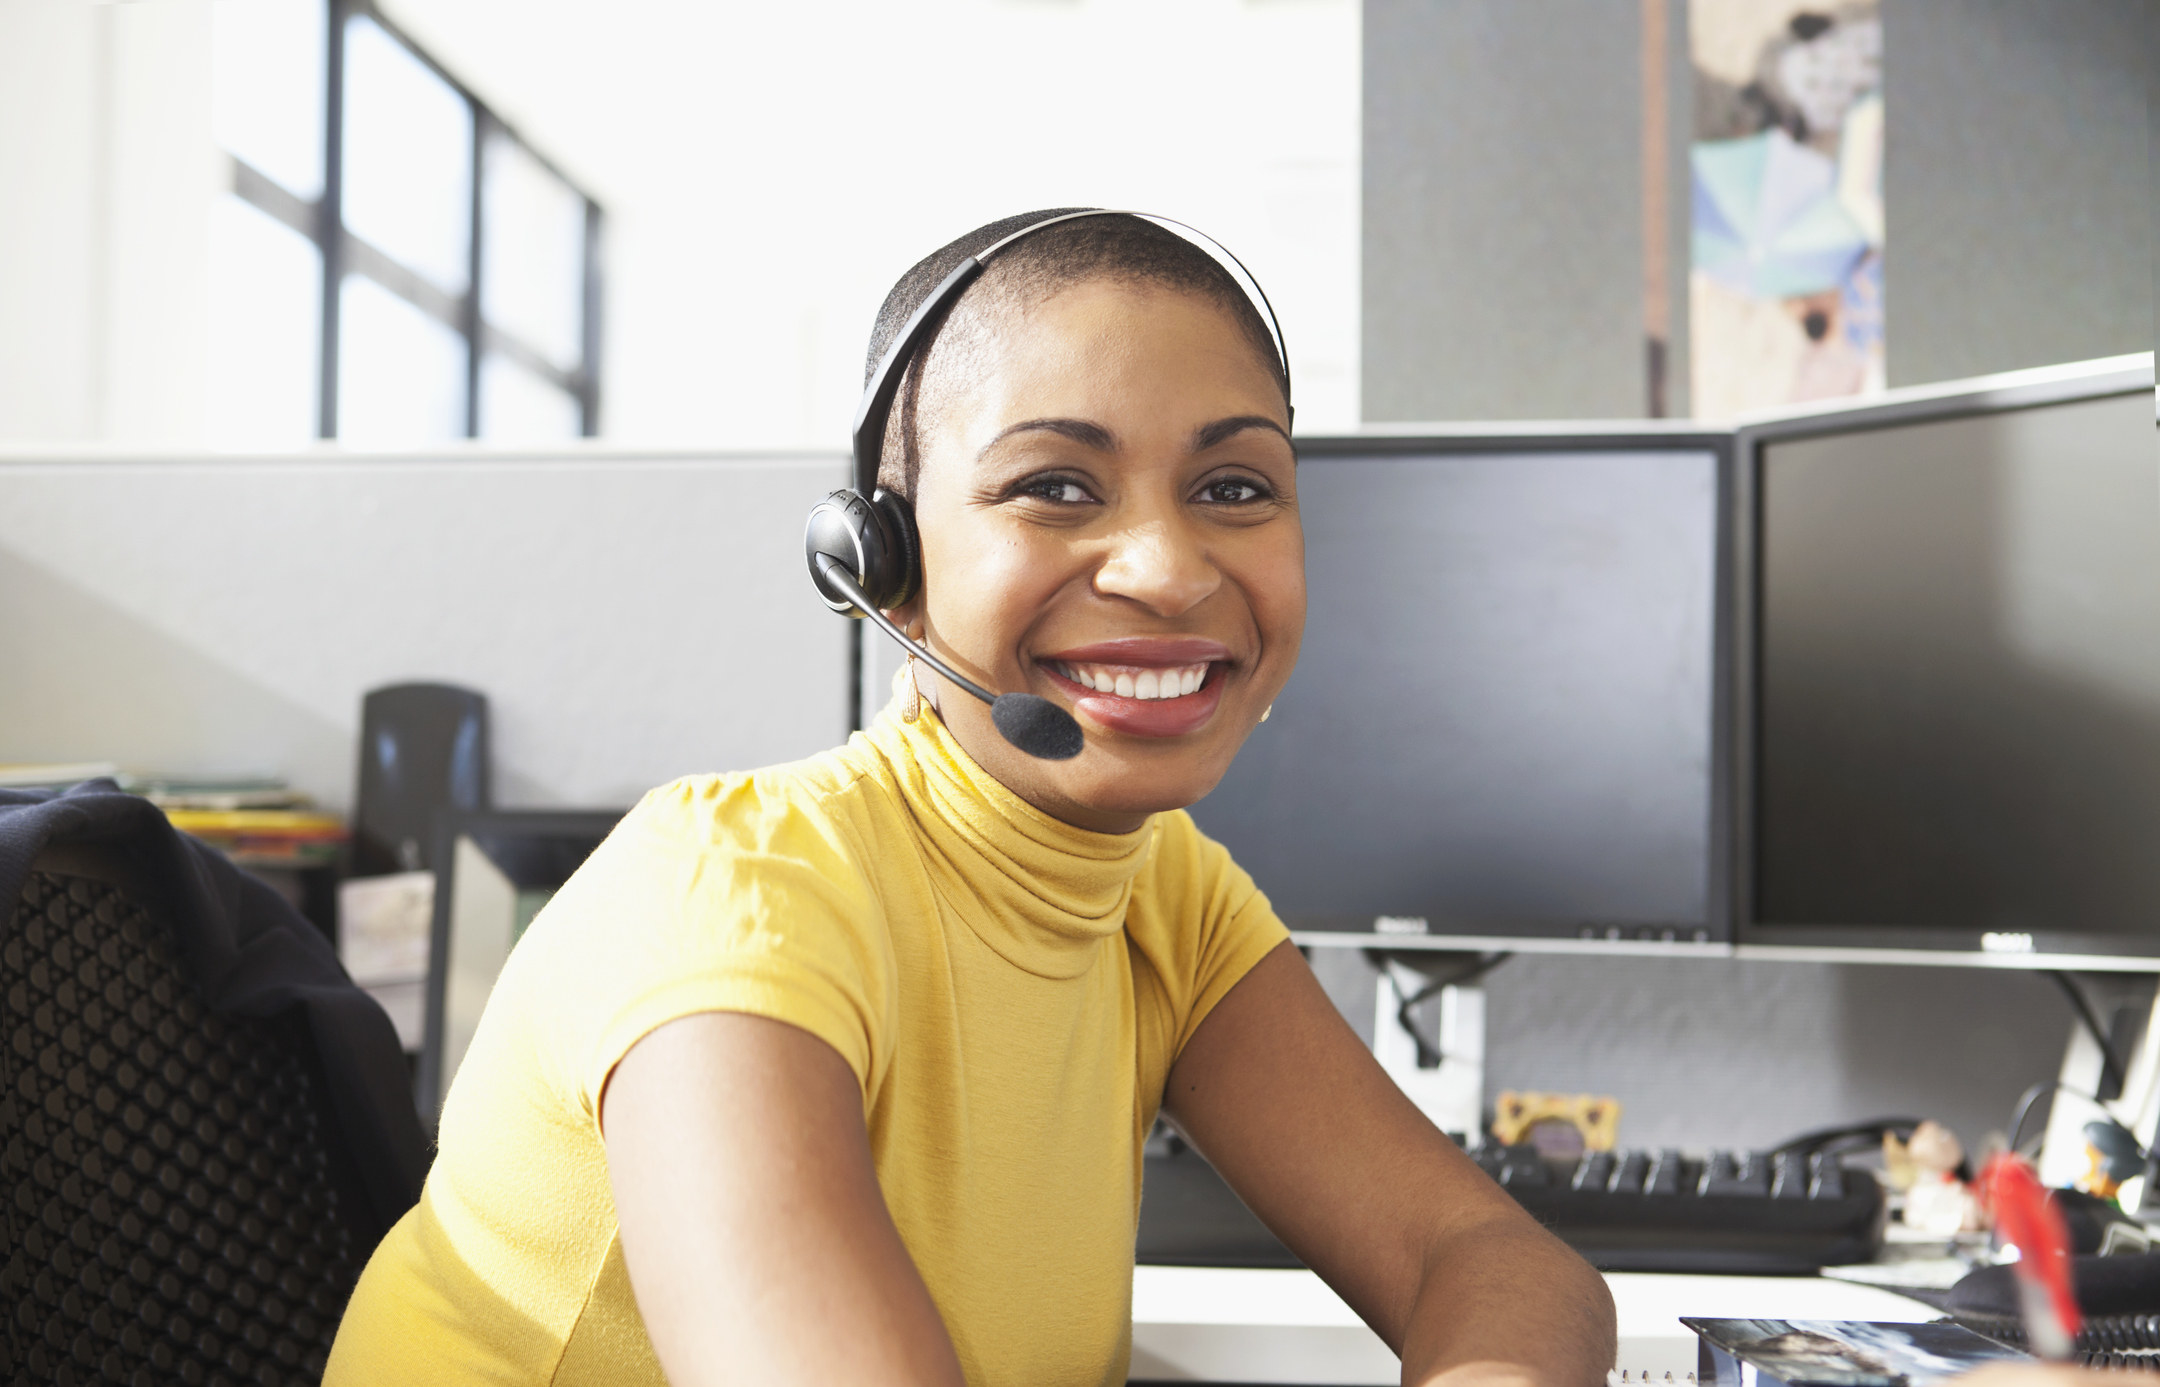 A call center worker smiles